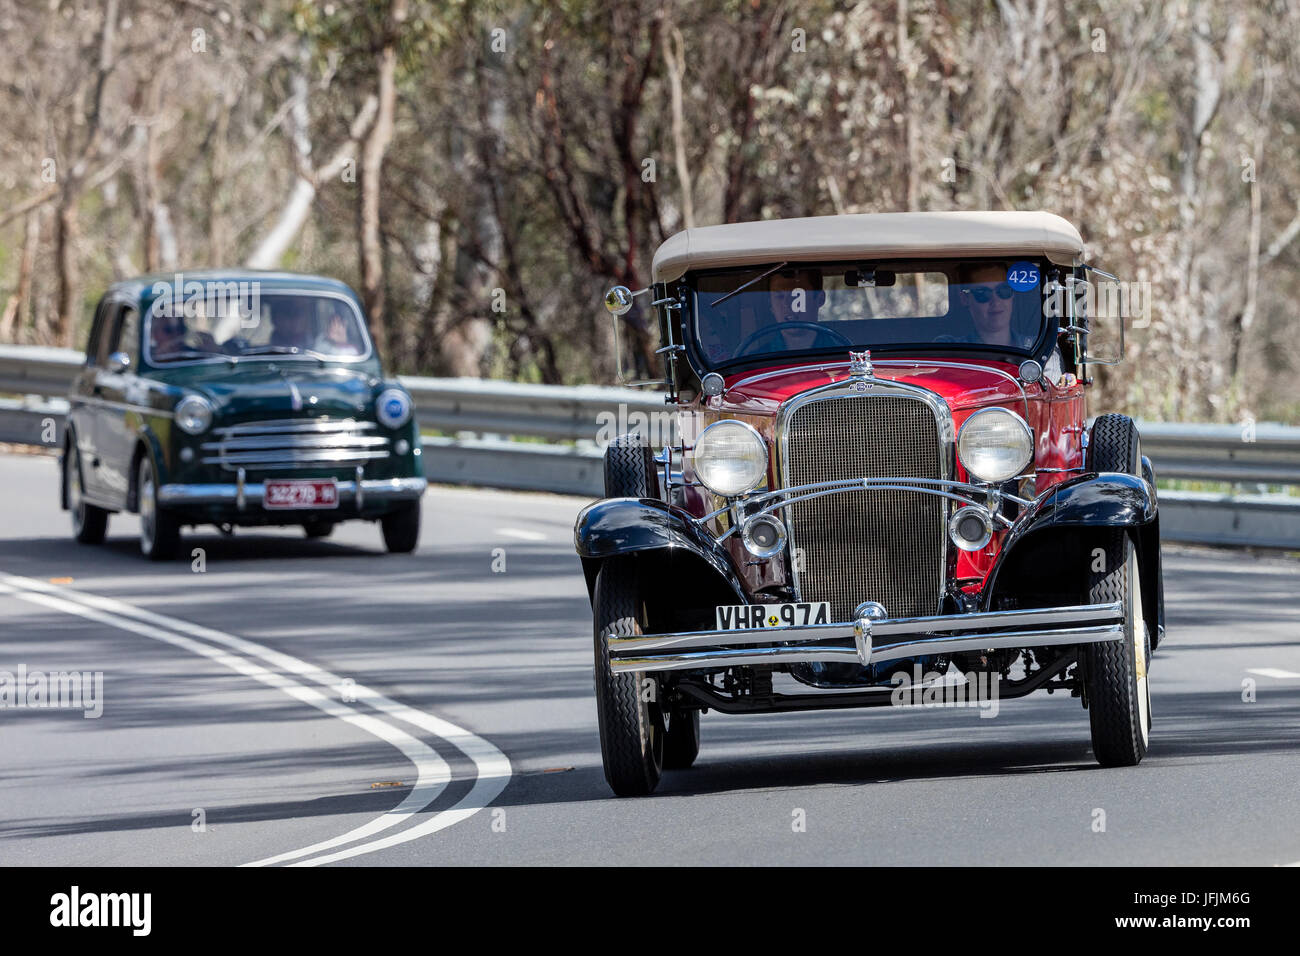 Vintage 1932 Chevrolet Confederate Tourer driving on country roads near the town of Birdwood, South Australia. Stock Photo